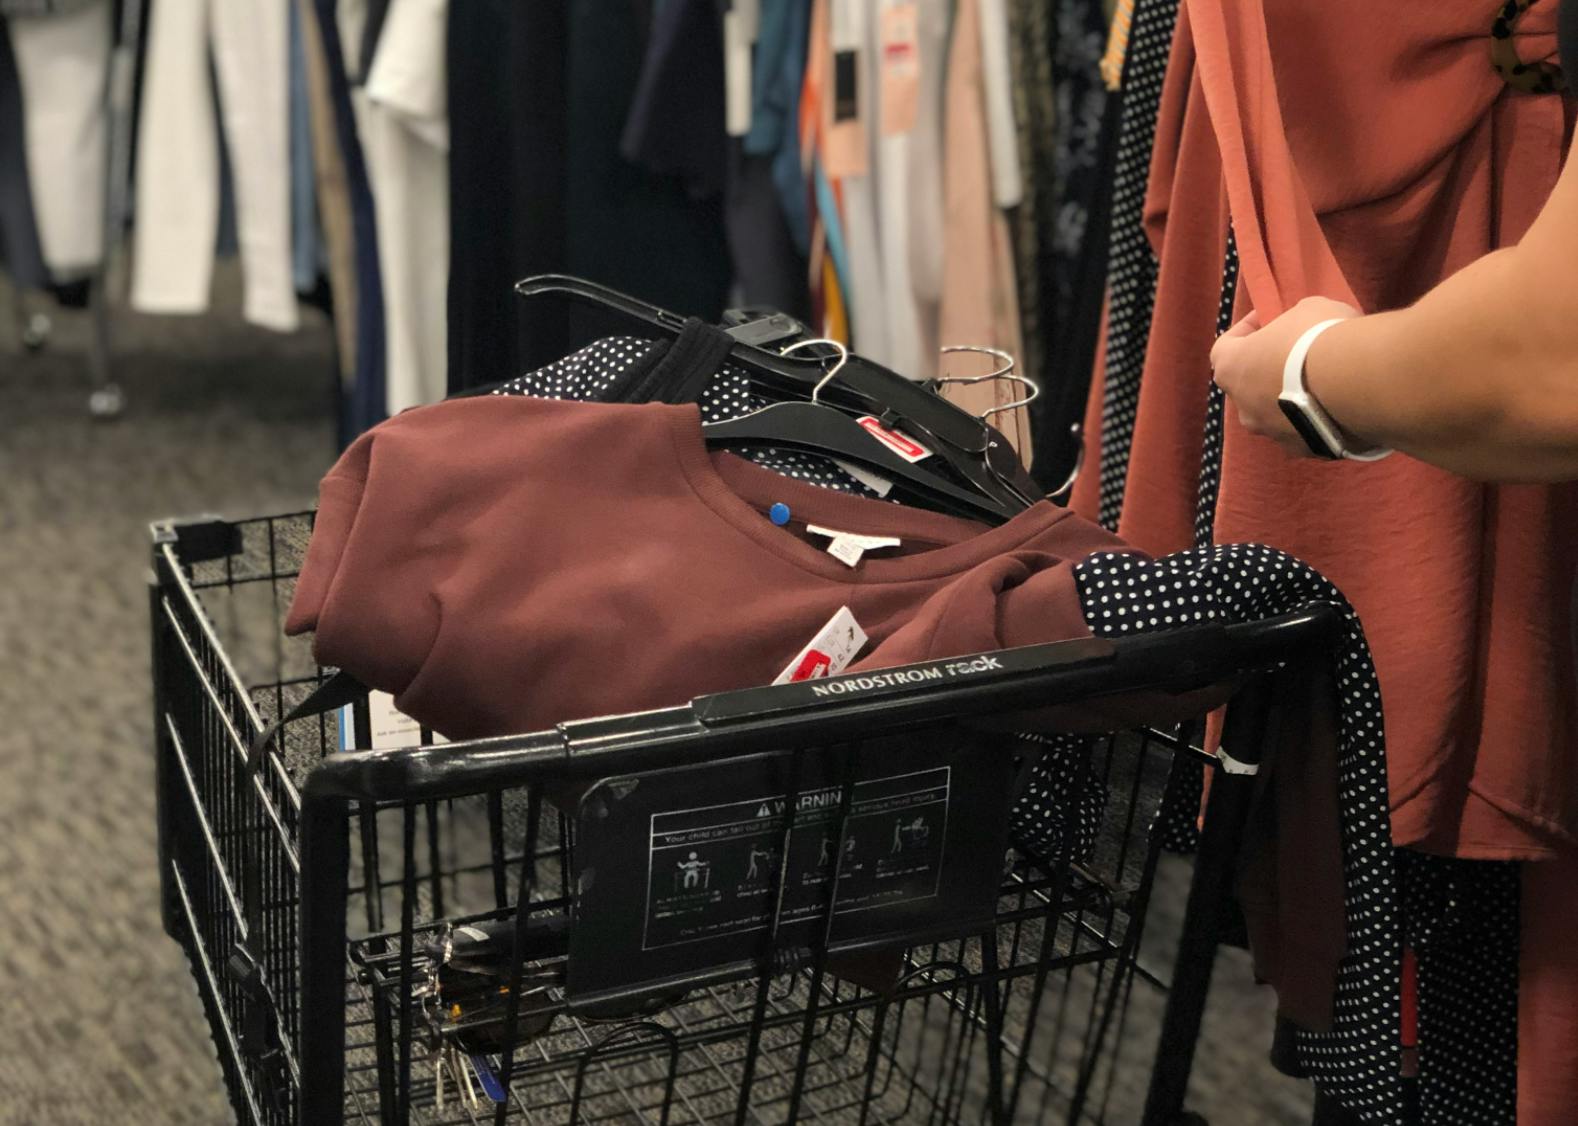 Nordstrom Rack Just Had Another Terrible Quarter